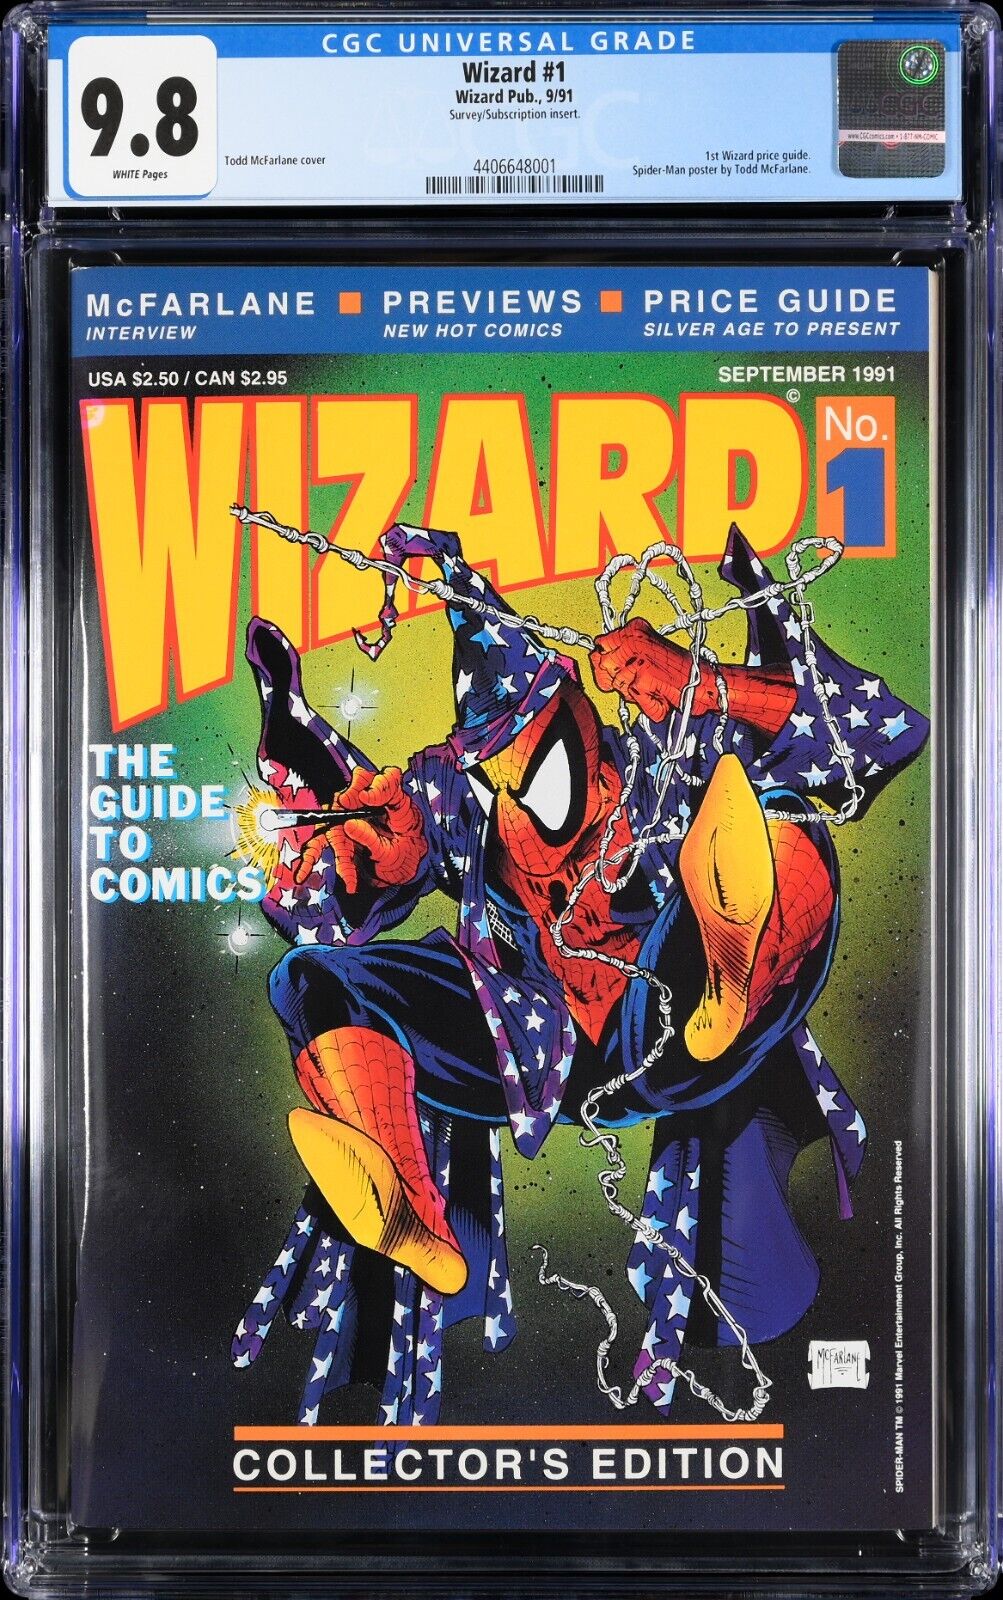 Wizard Magazine #1 (1991) McFarlane Cover CGC 9.6 White Pages Includes Poster